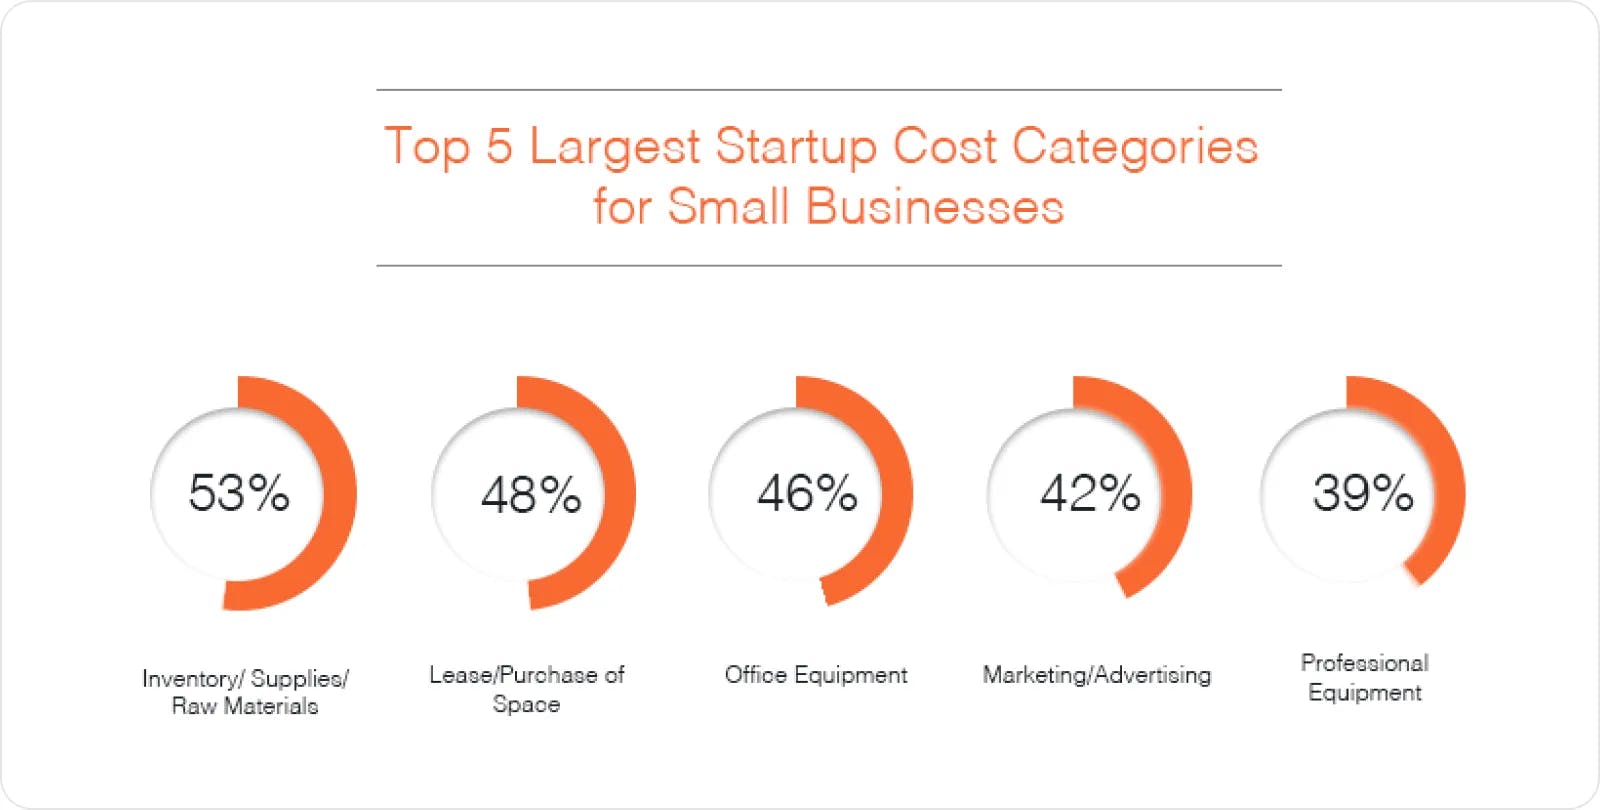 Top 5 largest startup cost categories for small business